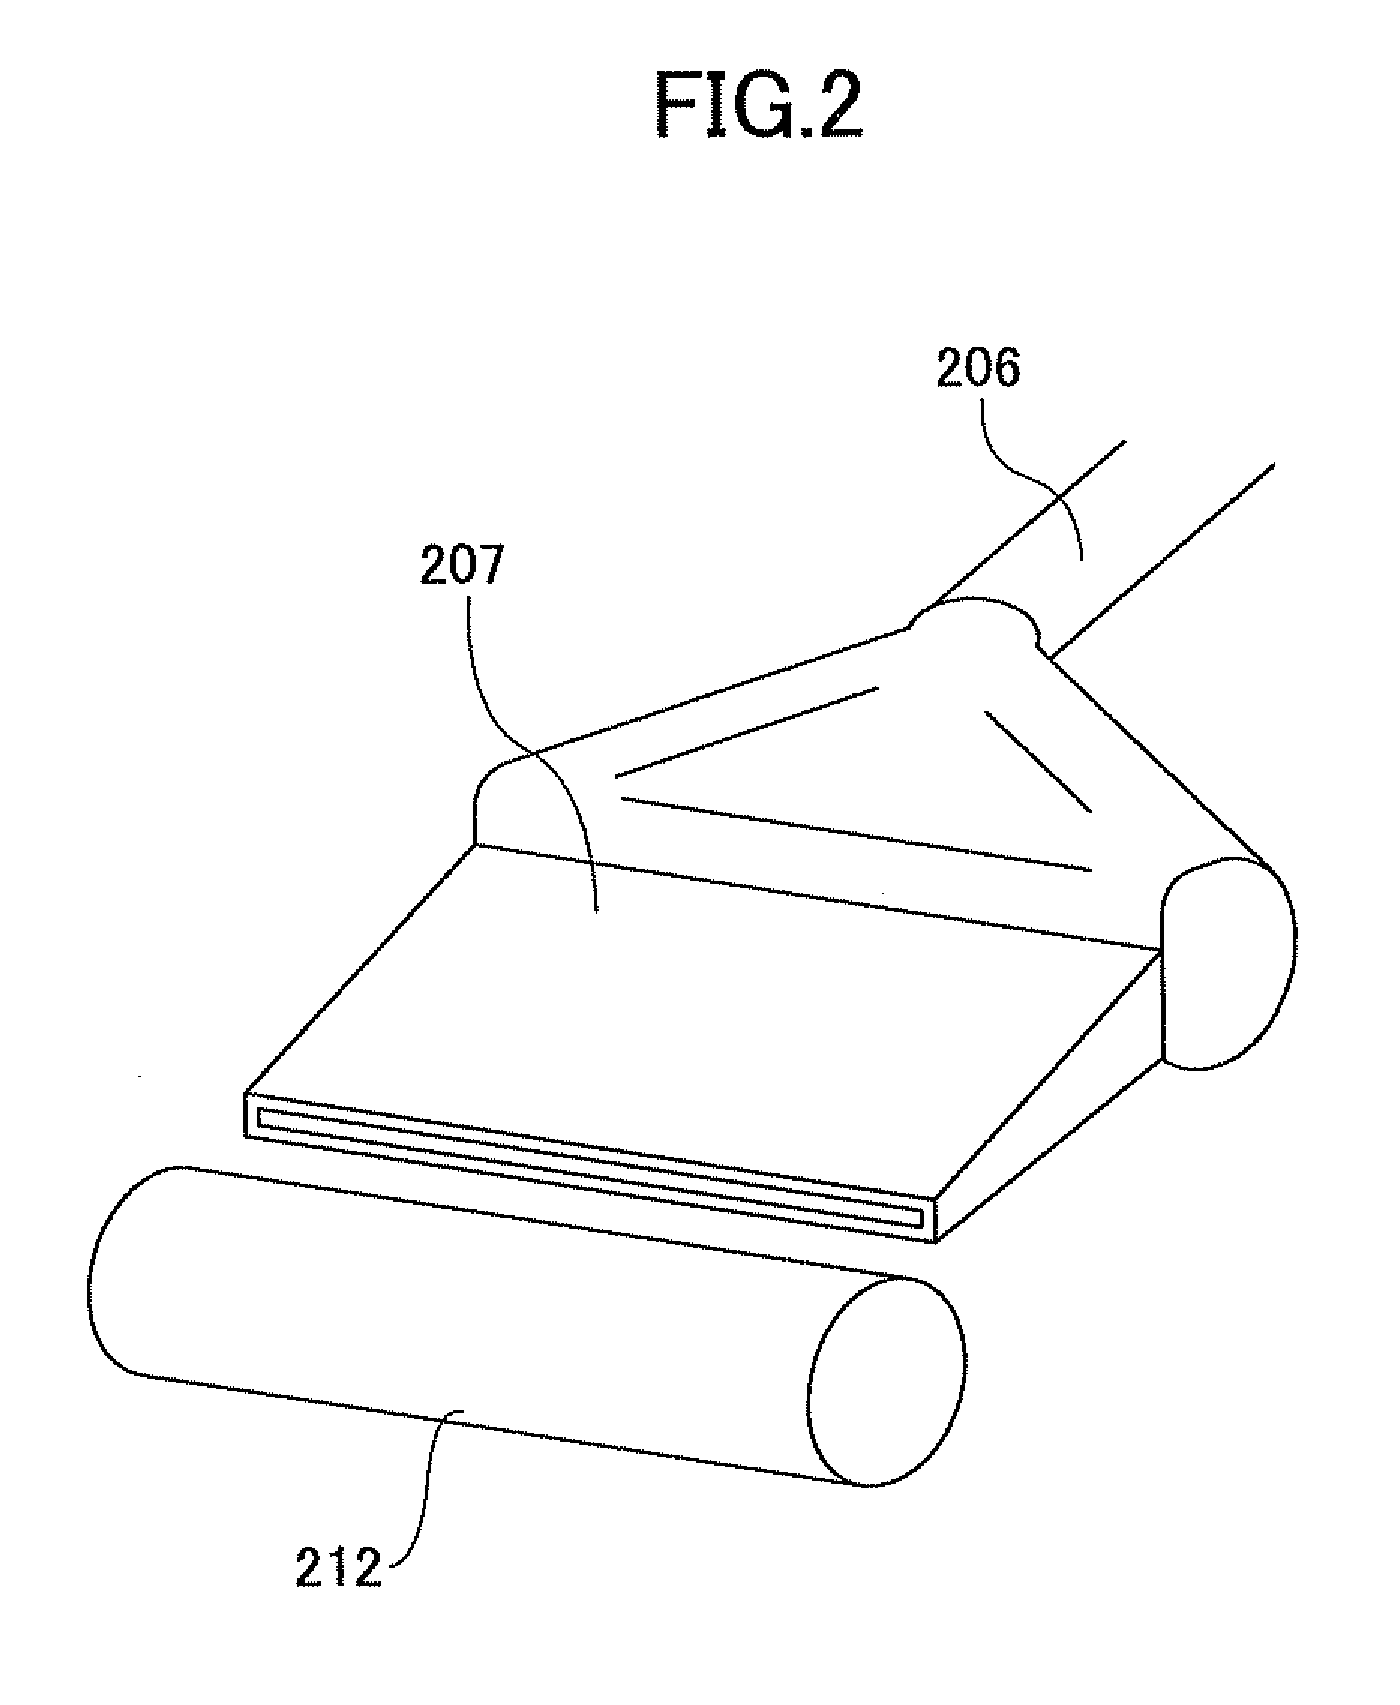 Image forming apparatus and foam application device